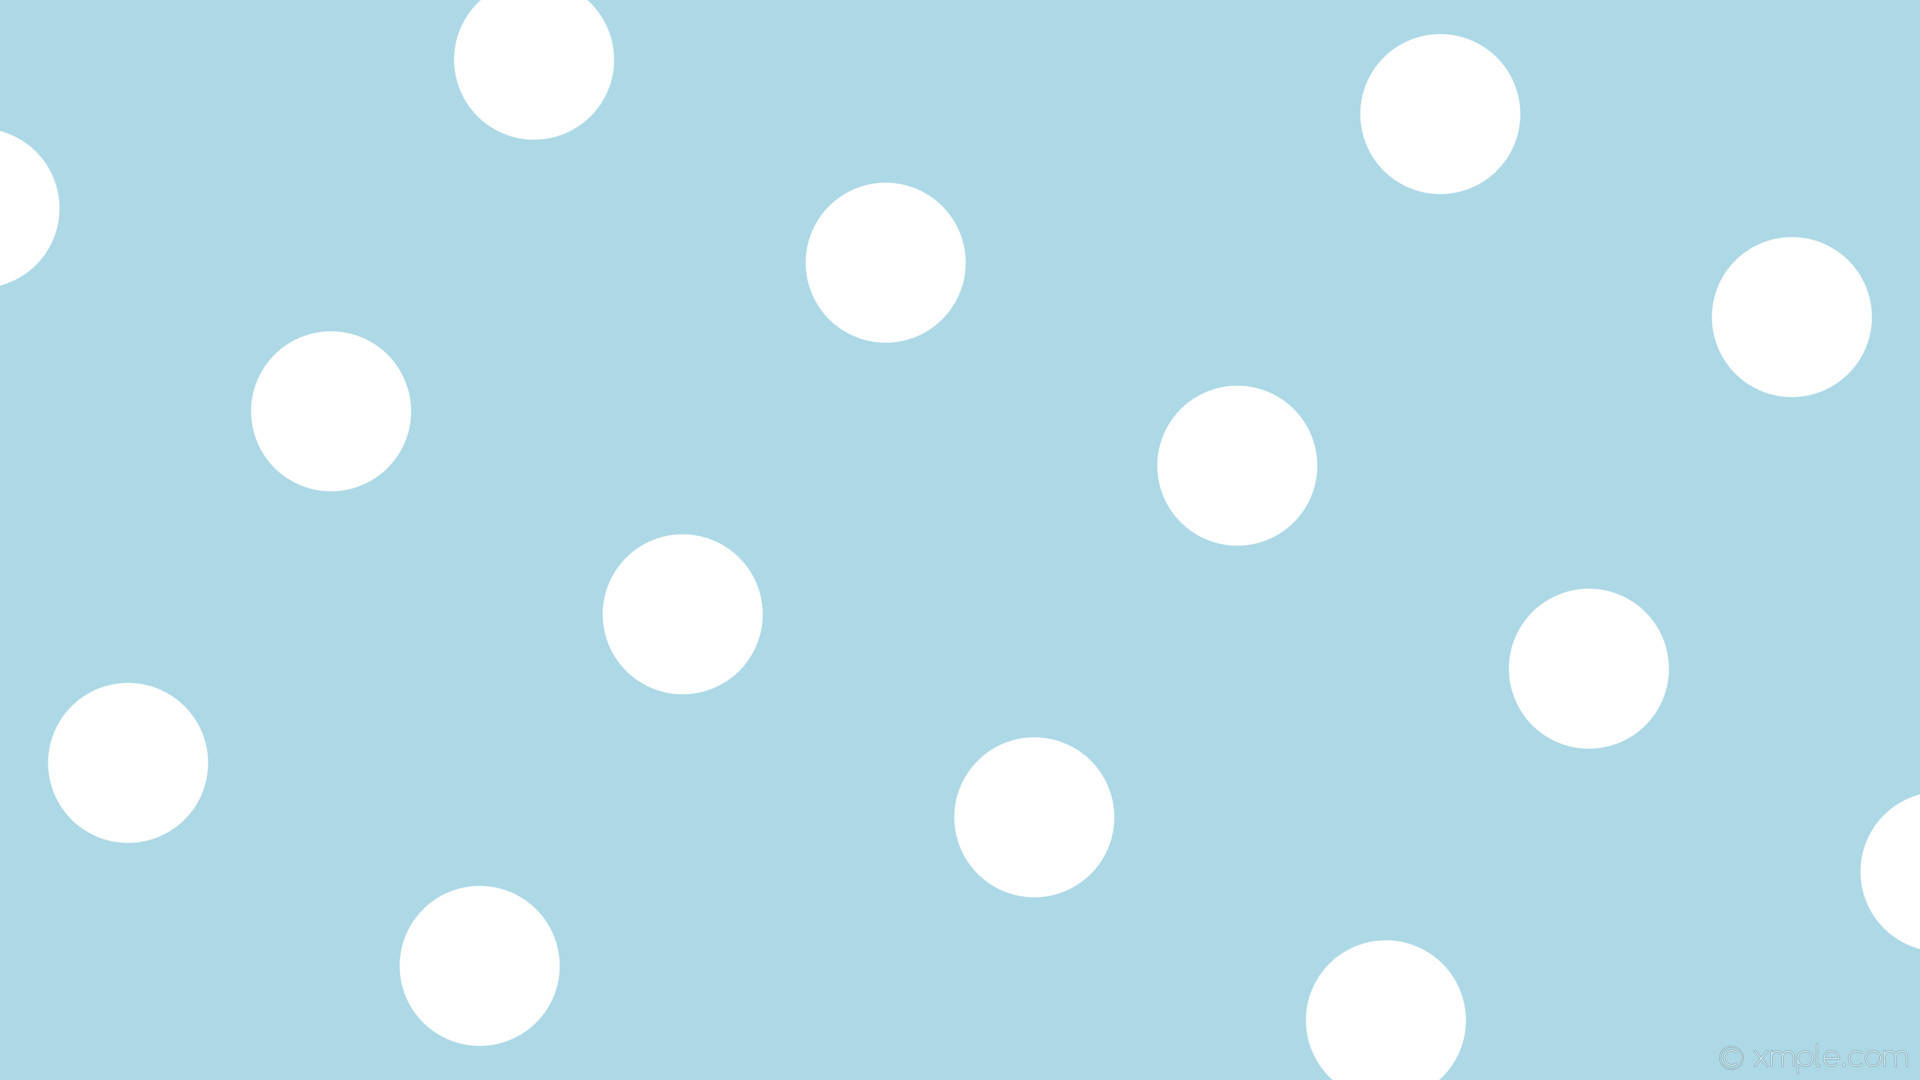 Pastel Blue And White Polka Dots Background